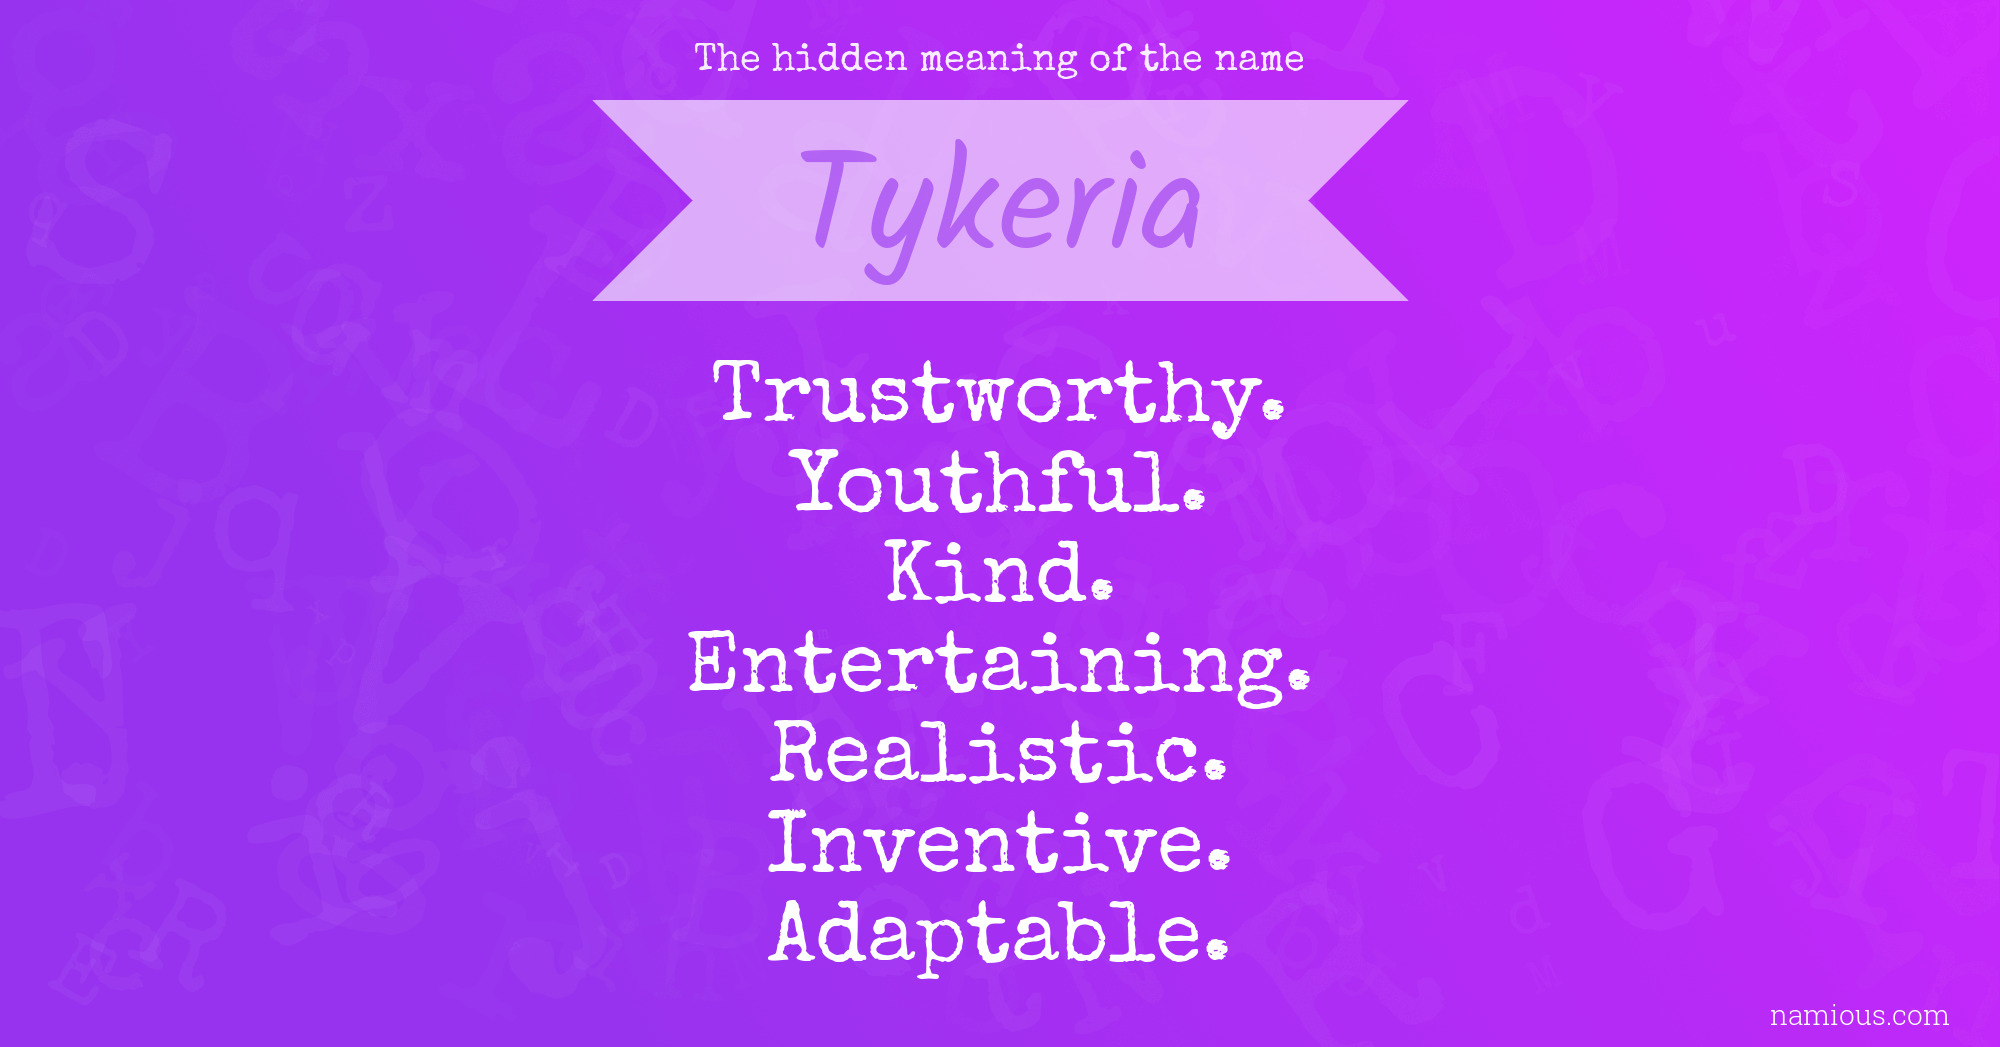 The hidden meaning of the name Tykeria